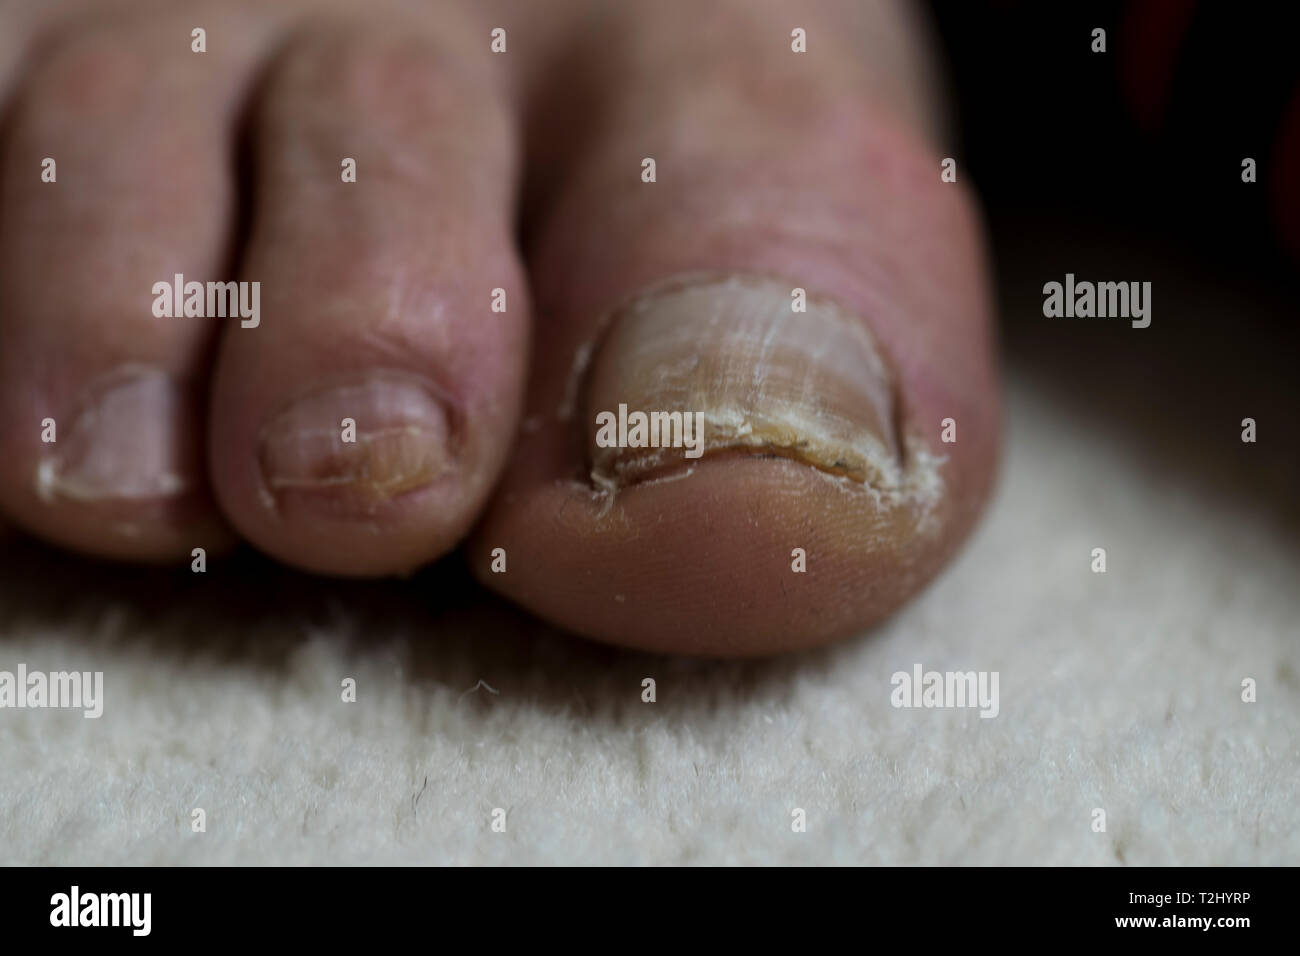 Big toe with nail damage. Elderly mans feet close up with nail trauma. Feet close up medical care concept. Stock Photo